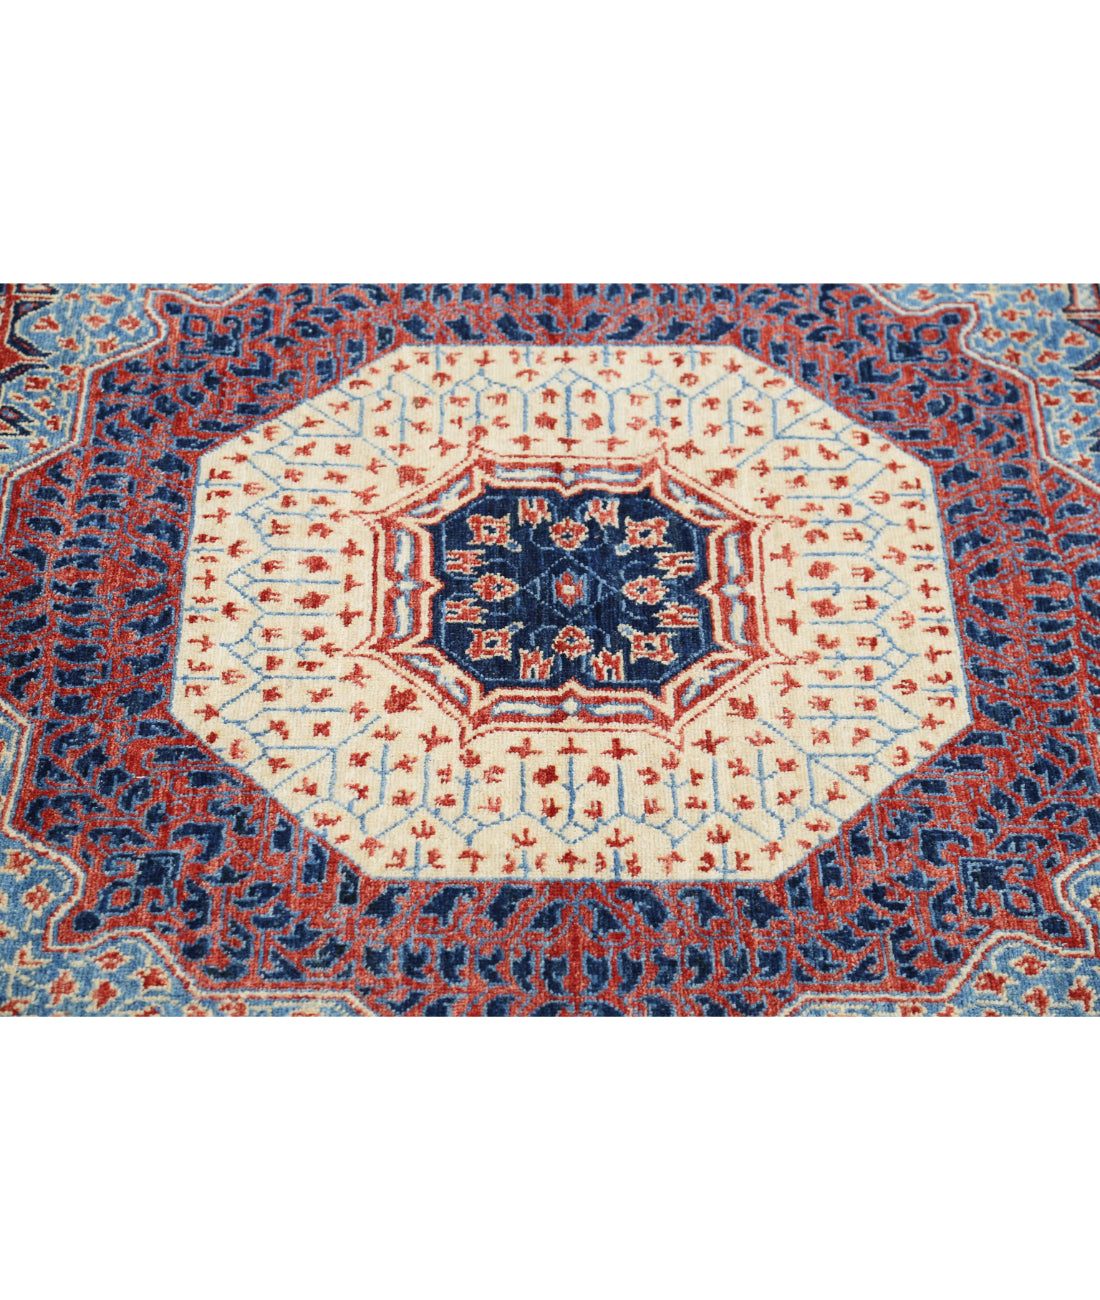 Mamluk 10'1'' X 13'8'' Hand-Knotted Wool Rug 10'1'' x 13'8'' (303 X 410) / Red / Blue